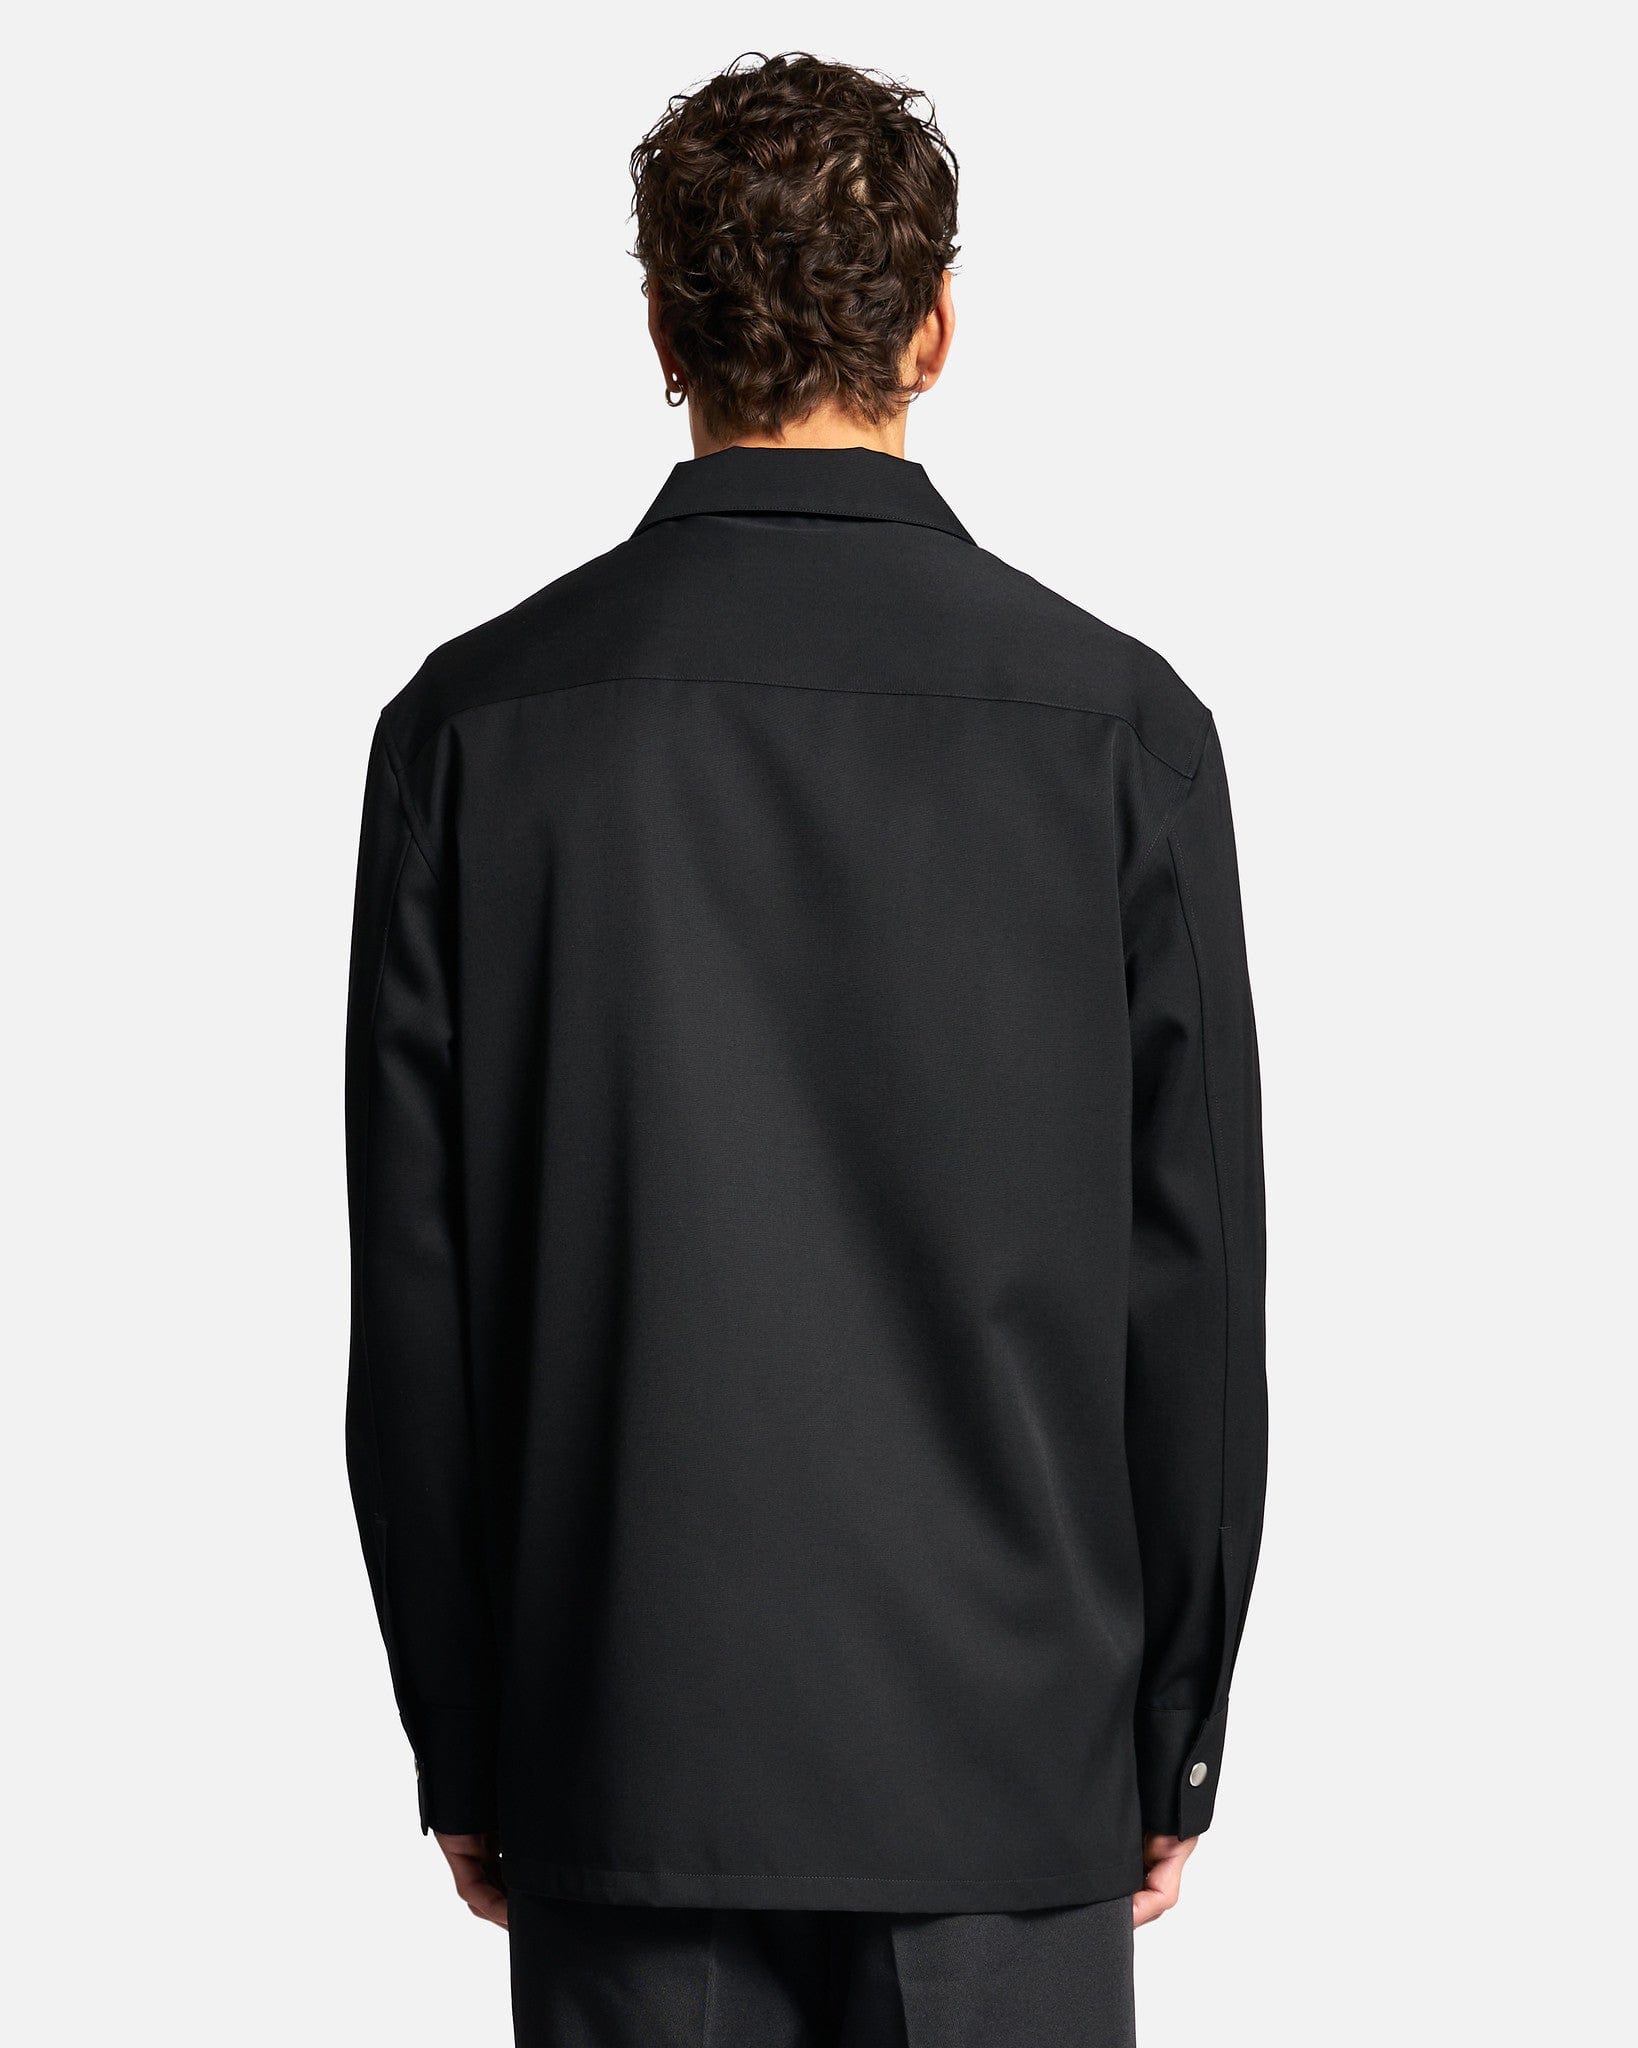 Relaxed Fit Zip Shirt in Black